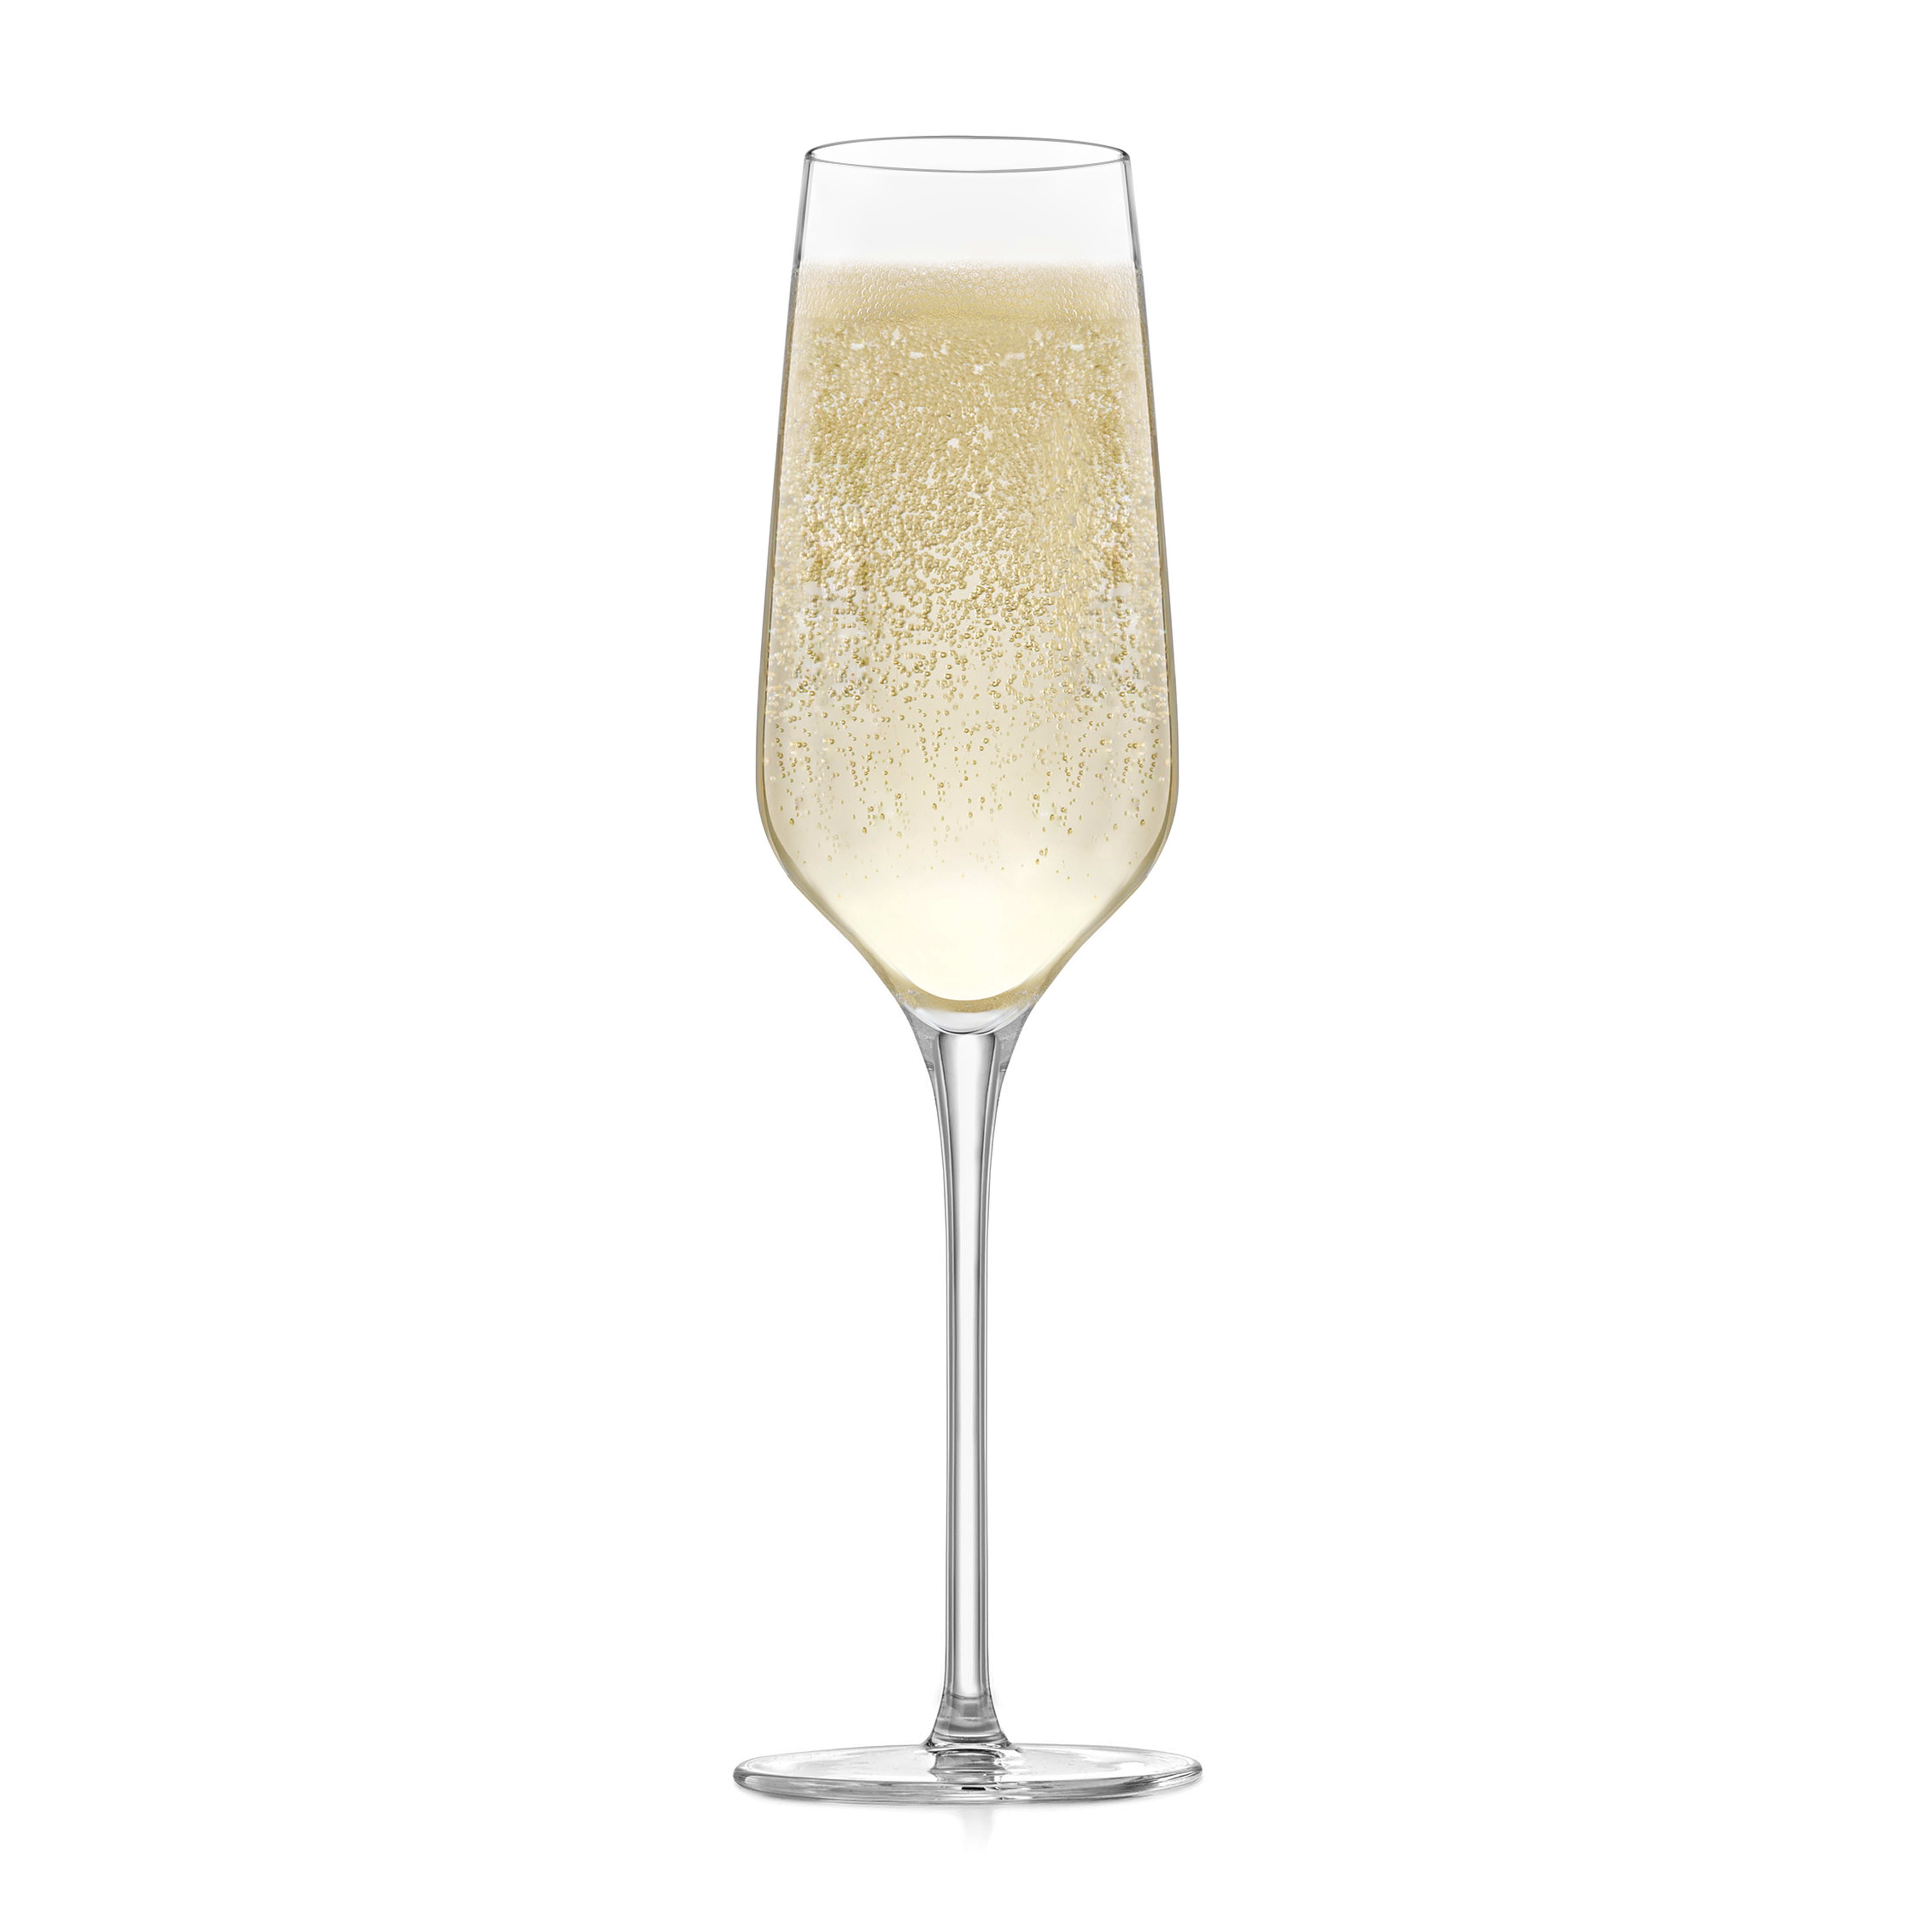 Libbey Signature Greenwich Champagne Flute Glasses, 8.25-ounce